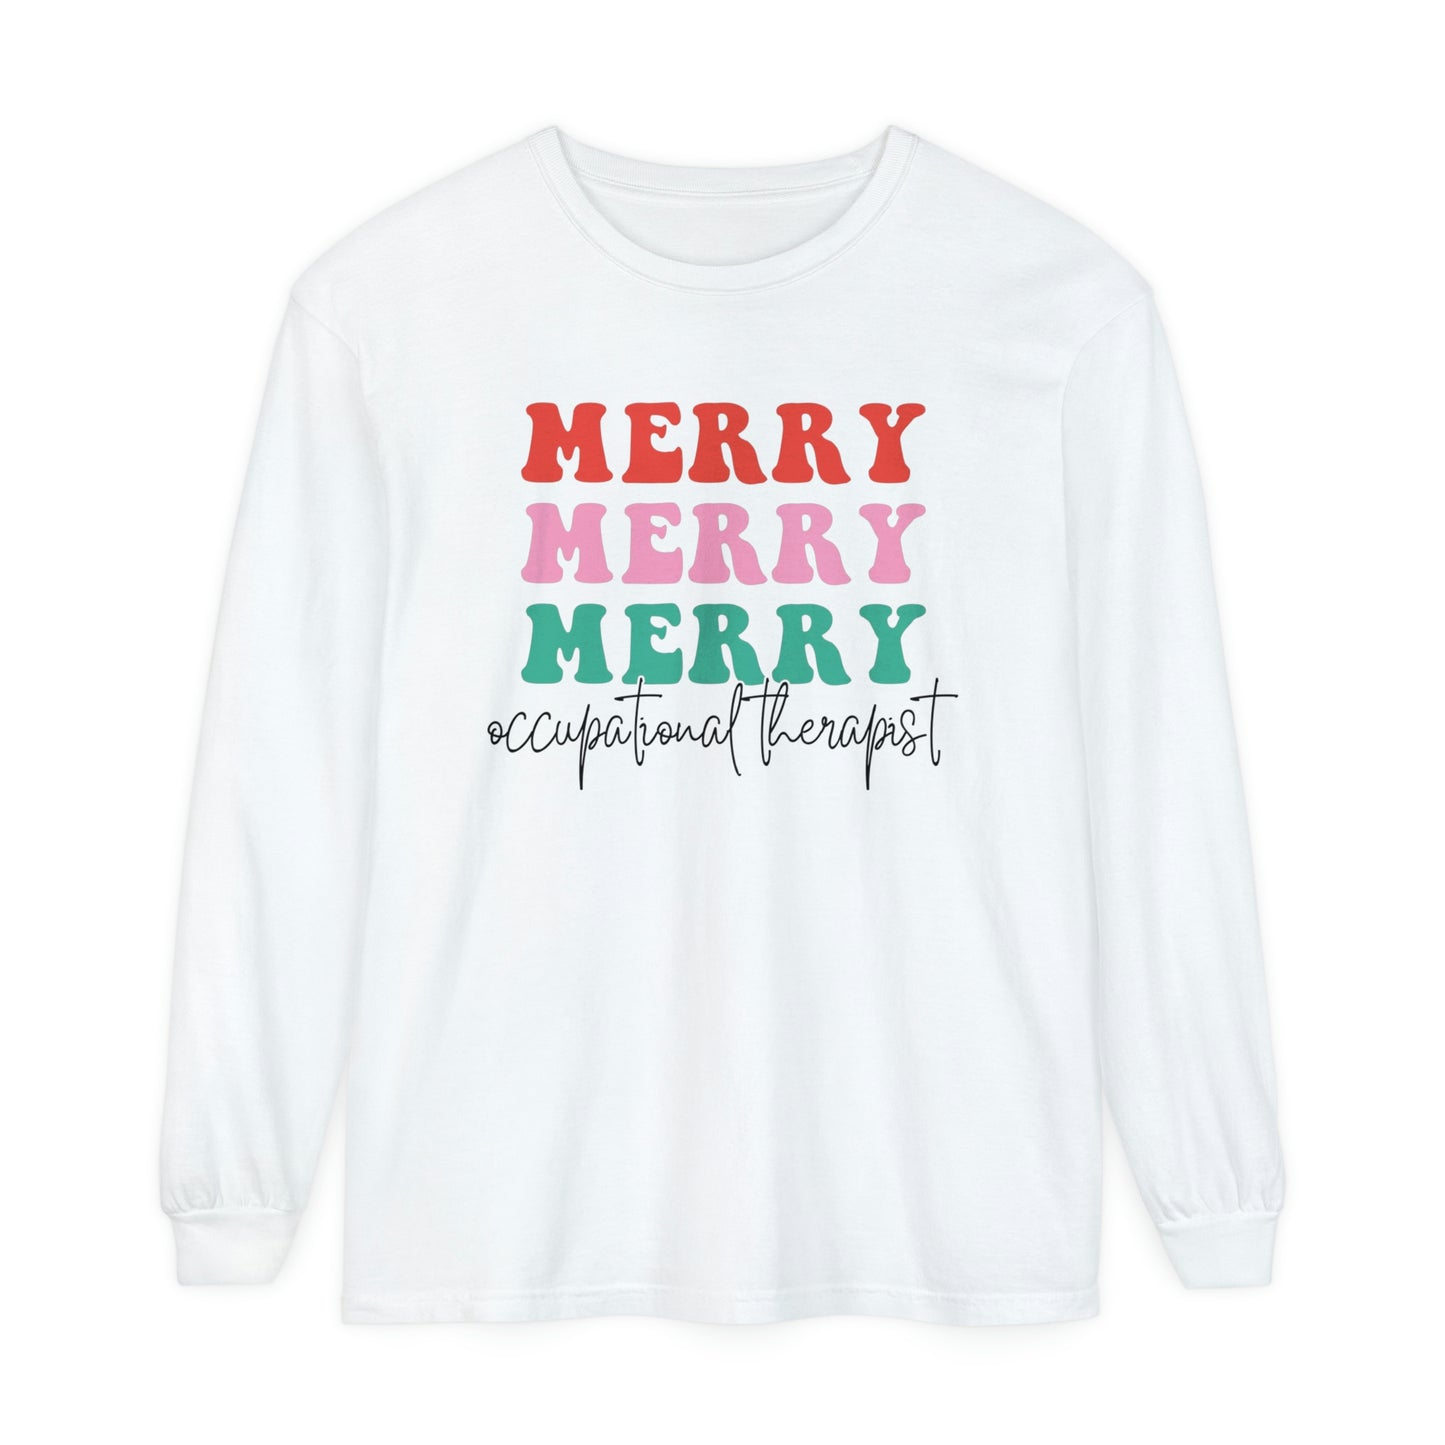 Merry Occupational Therapist Long Sleeve Comfort Colors T-Shirt